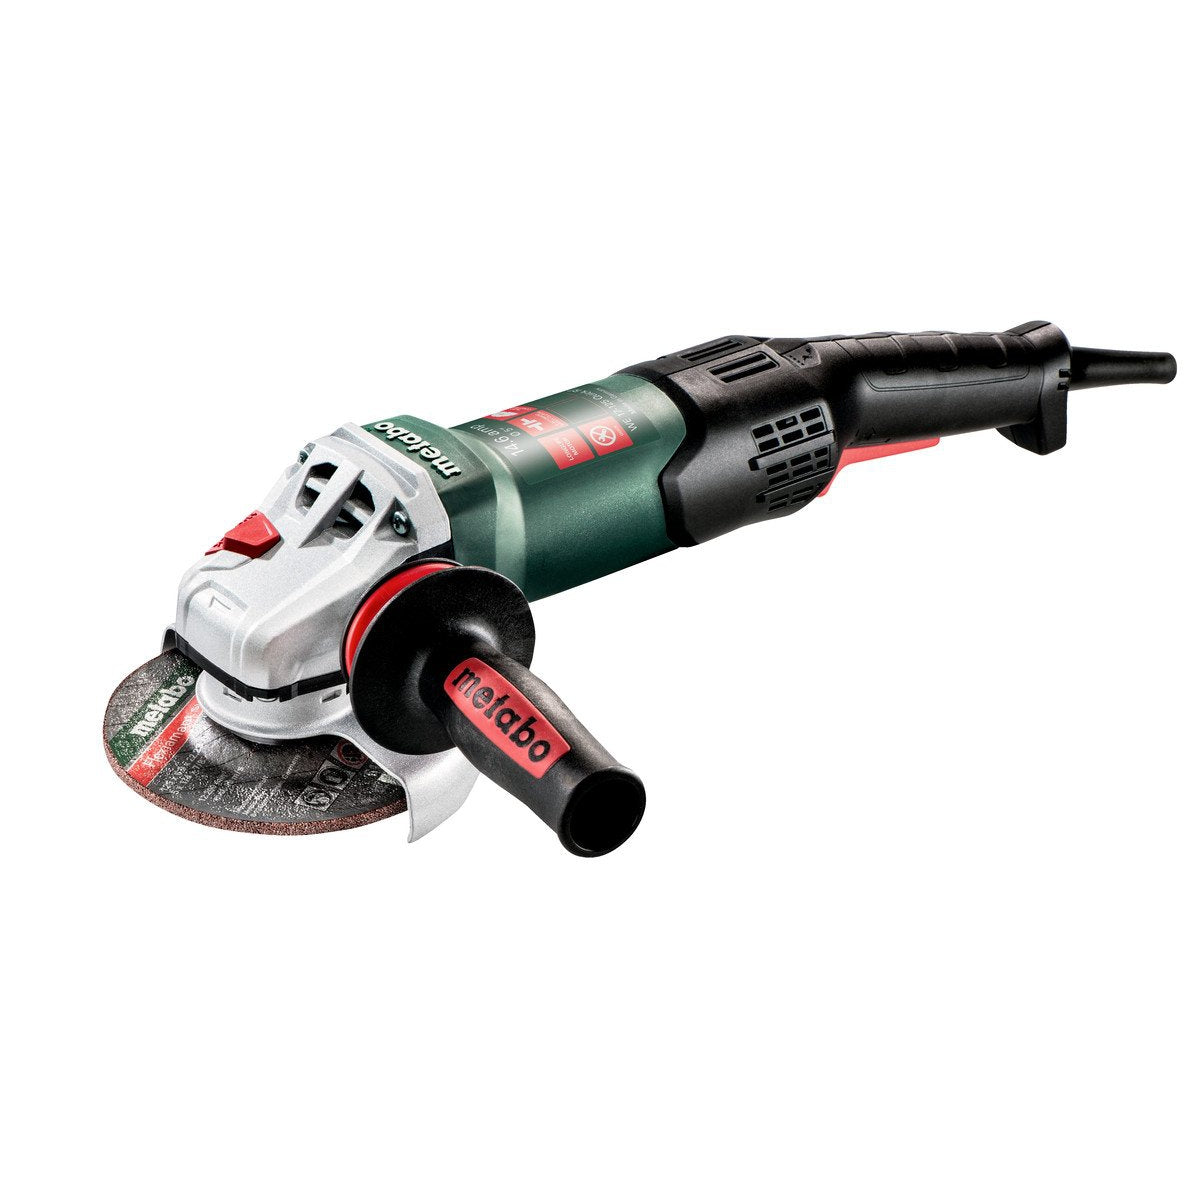 Metabo WE 17-125 5" Quick RT Angle Grinder - 601086420